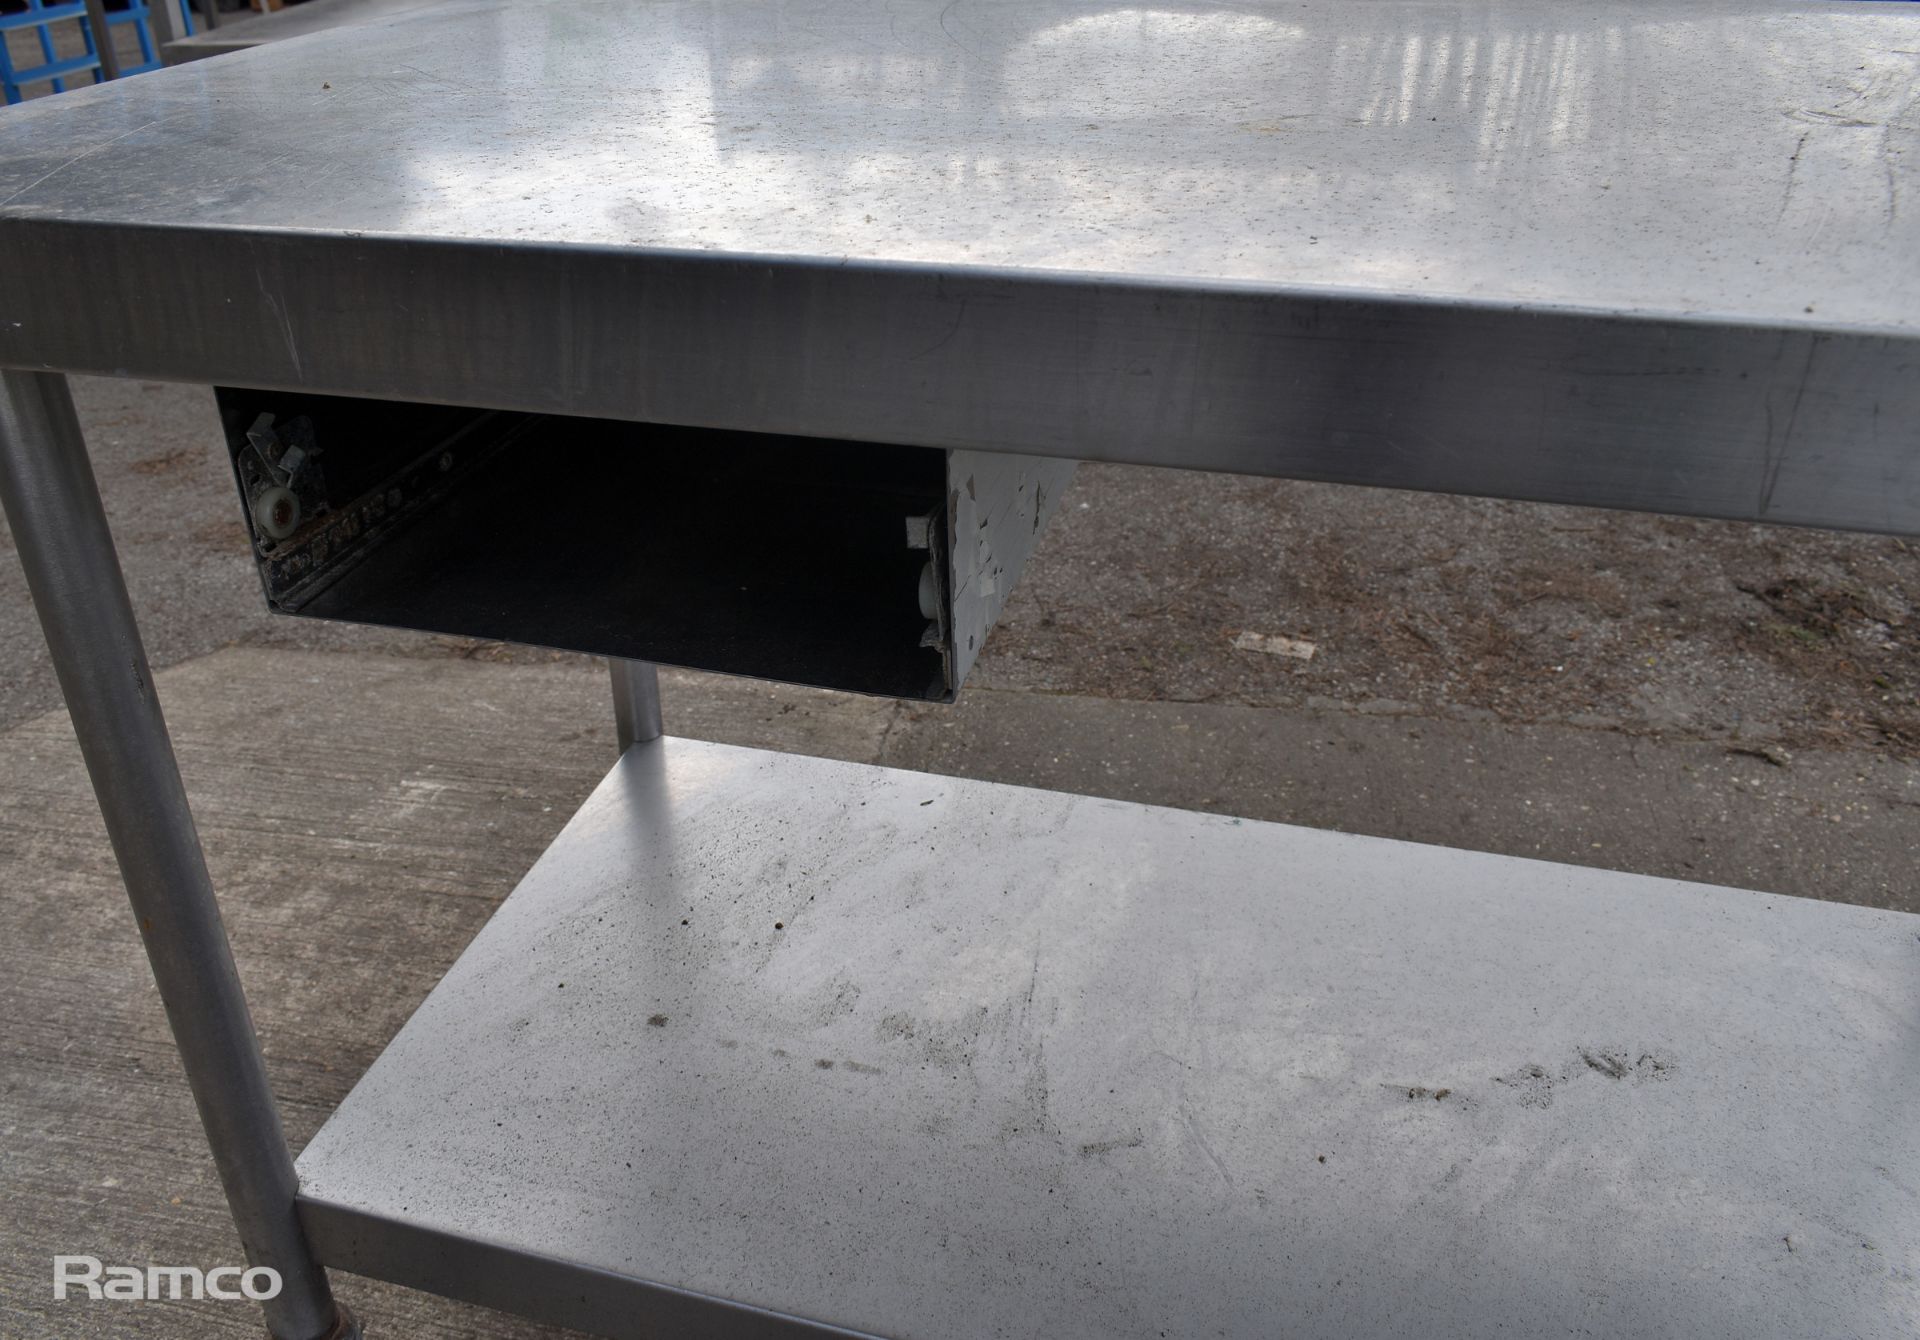 Stainless steel table on castors - W 1400 x D 700 x H 880mm - Image 4 of 4